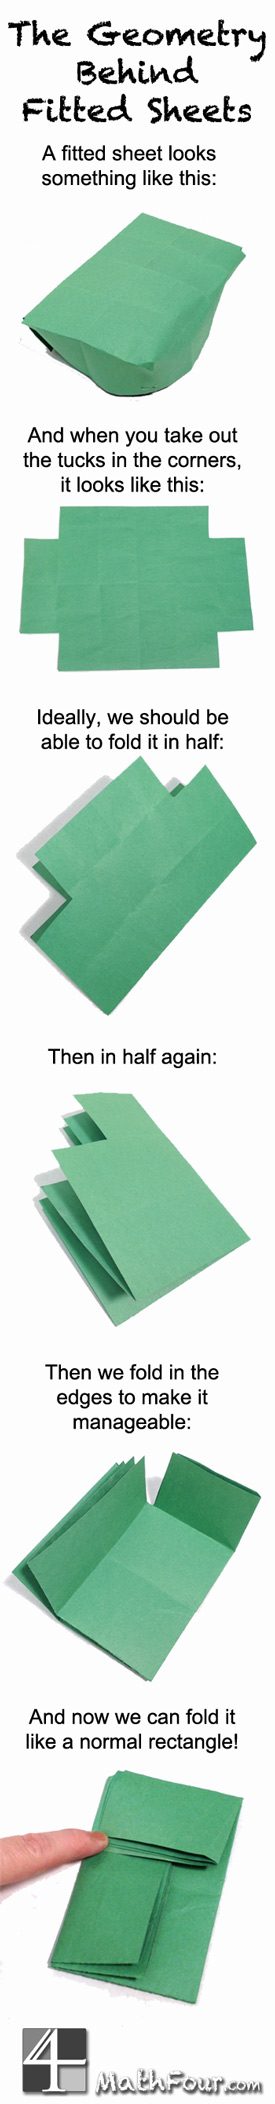 Geometry behind Fitted Sheets (www.MathFour.com)